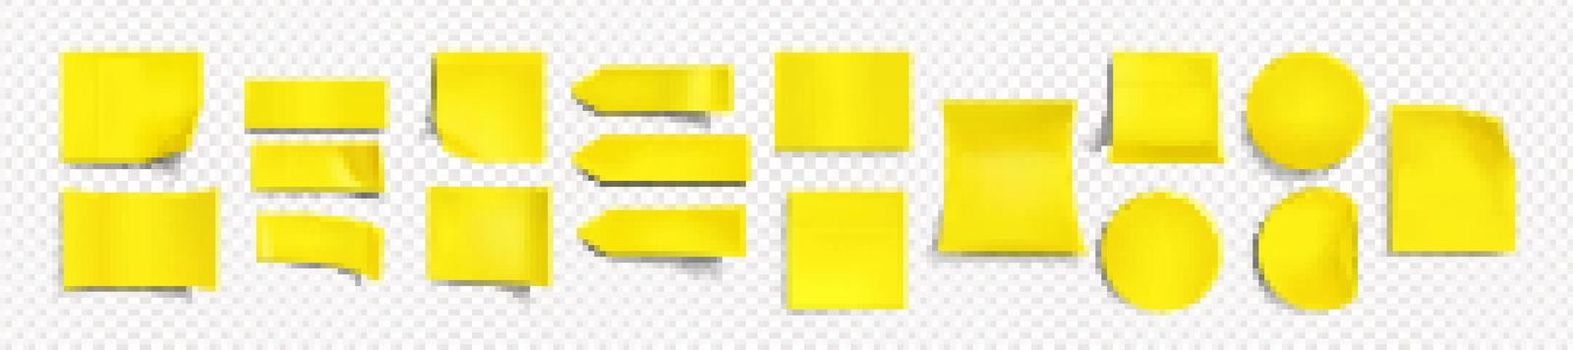 Yellow stickers of different shapes with curl edge